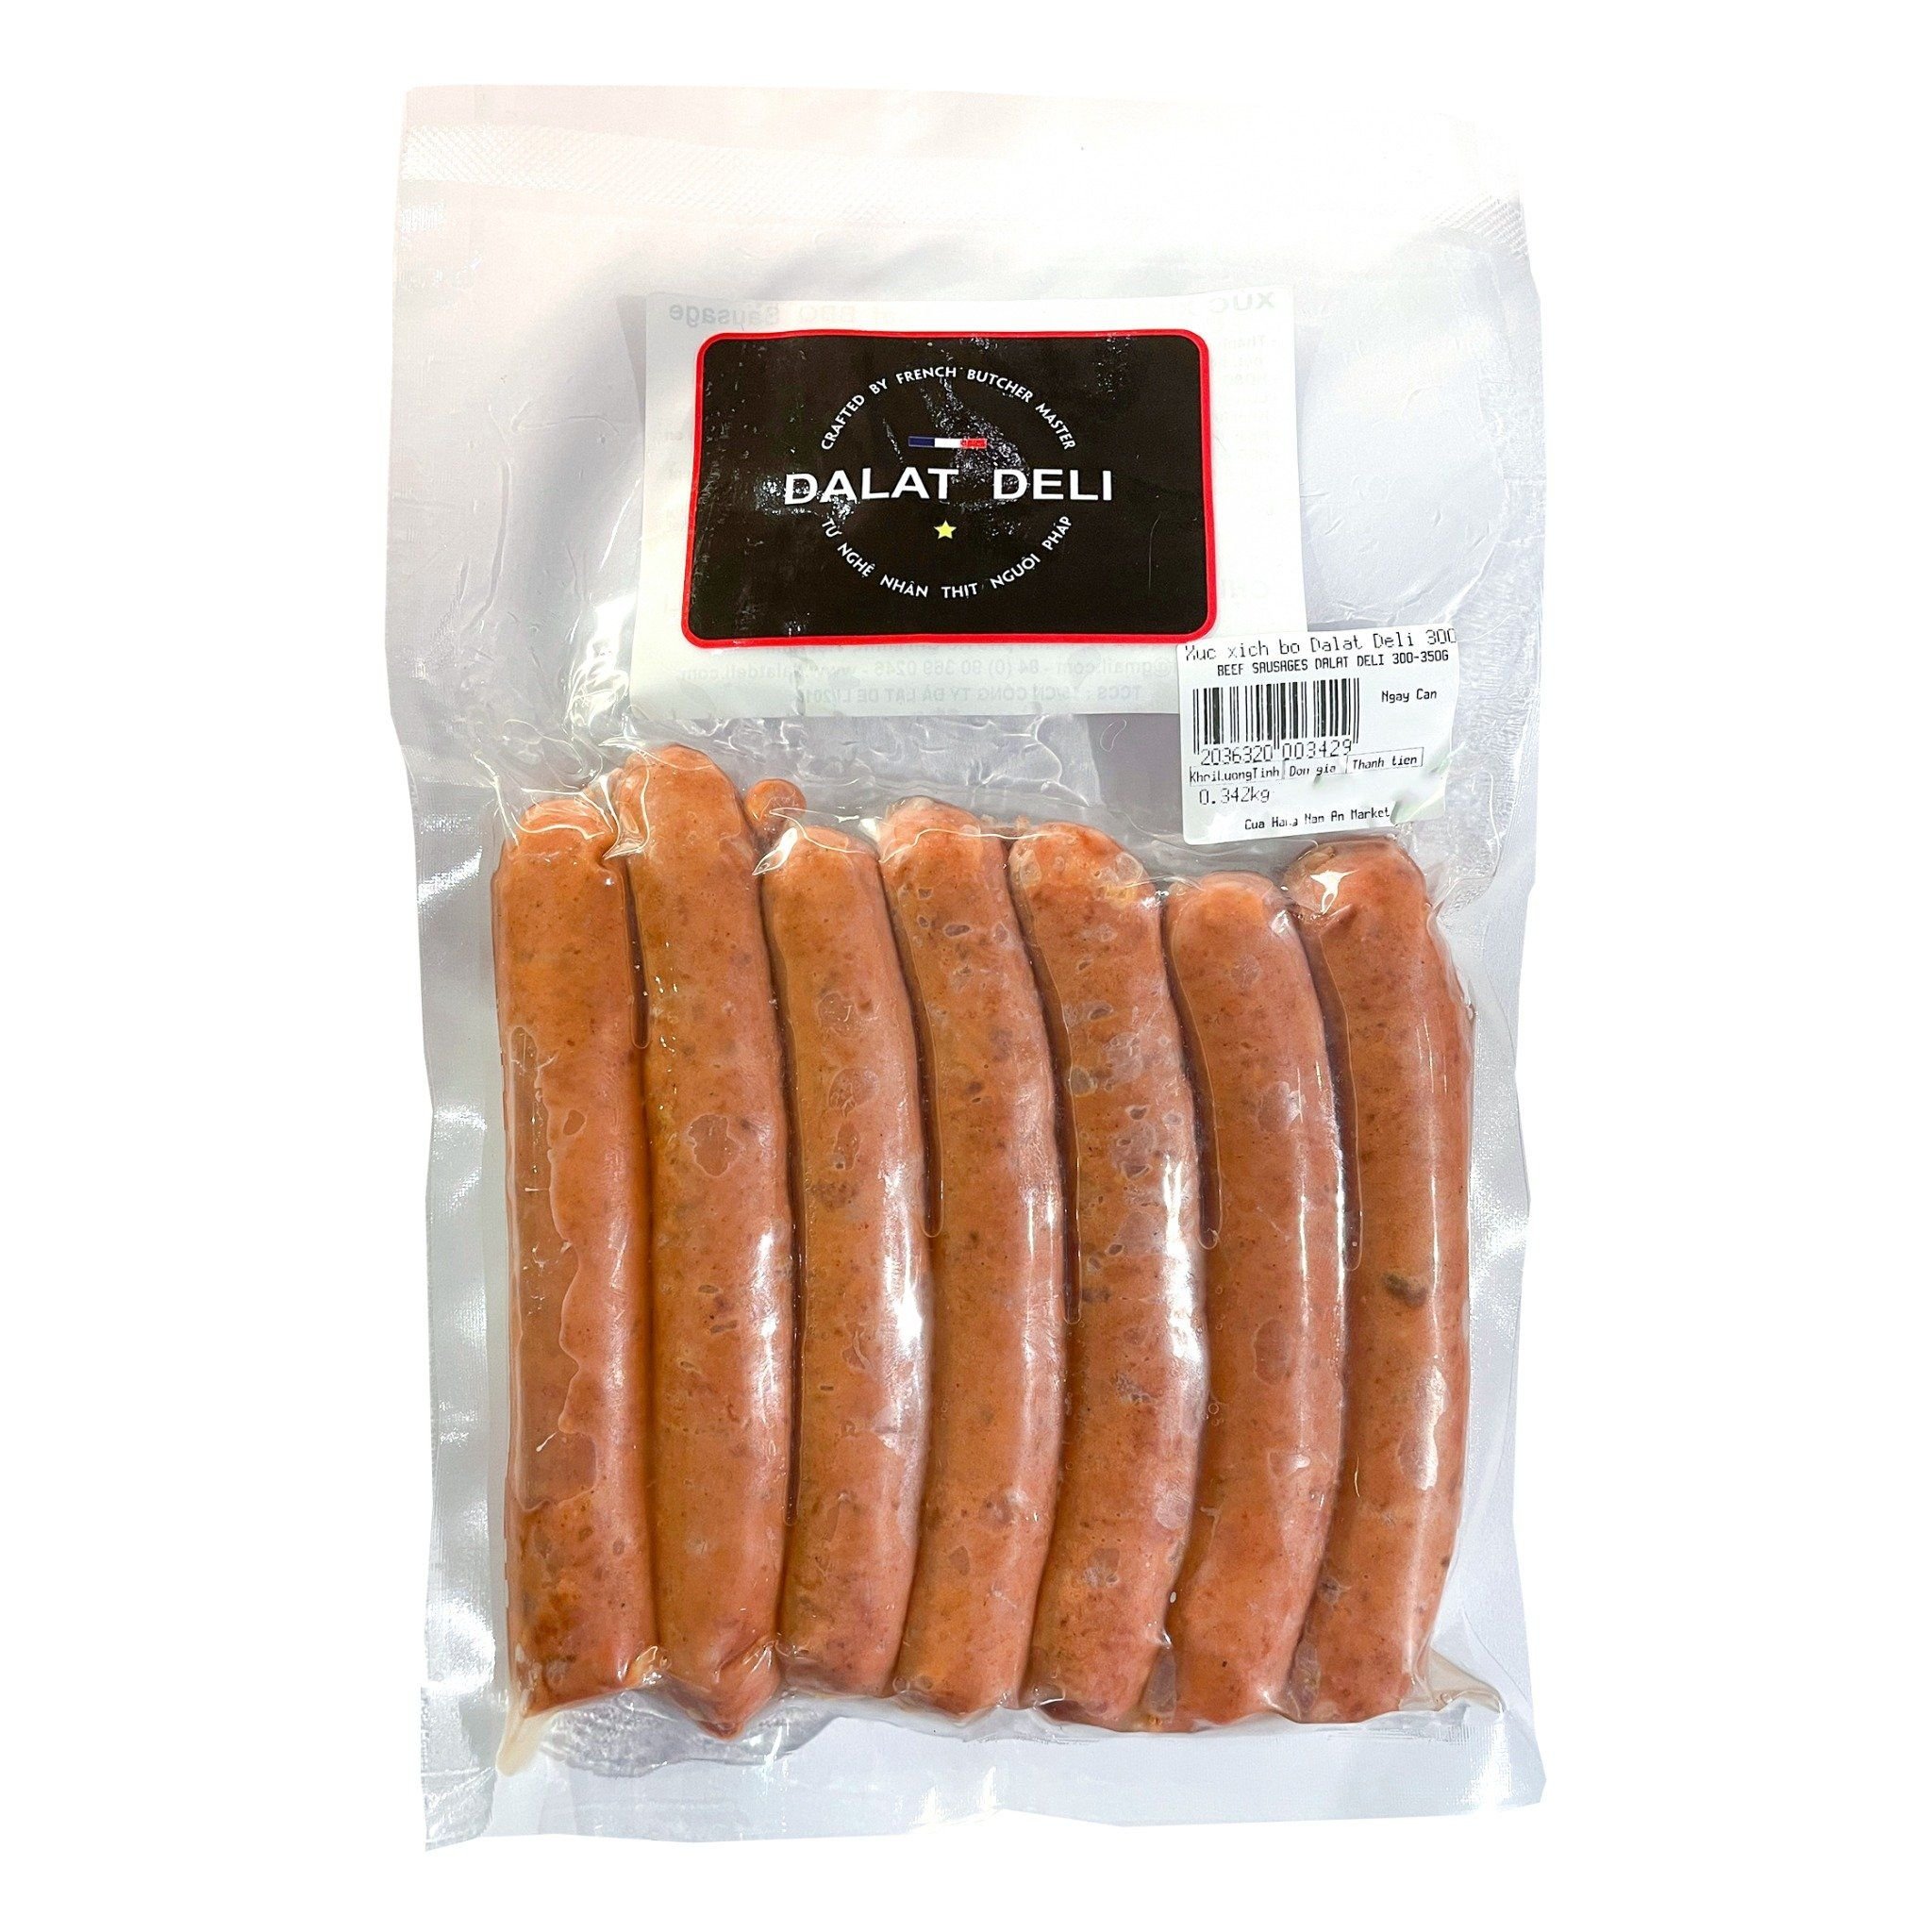 Beef Sausage For Grill Dalat Deli 300G- 